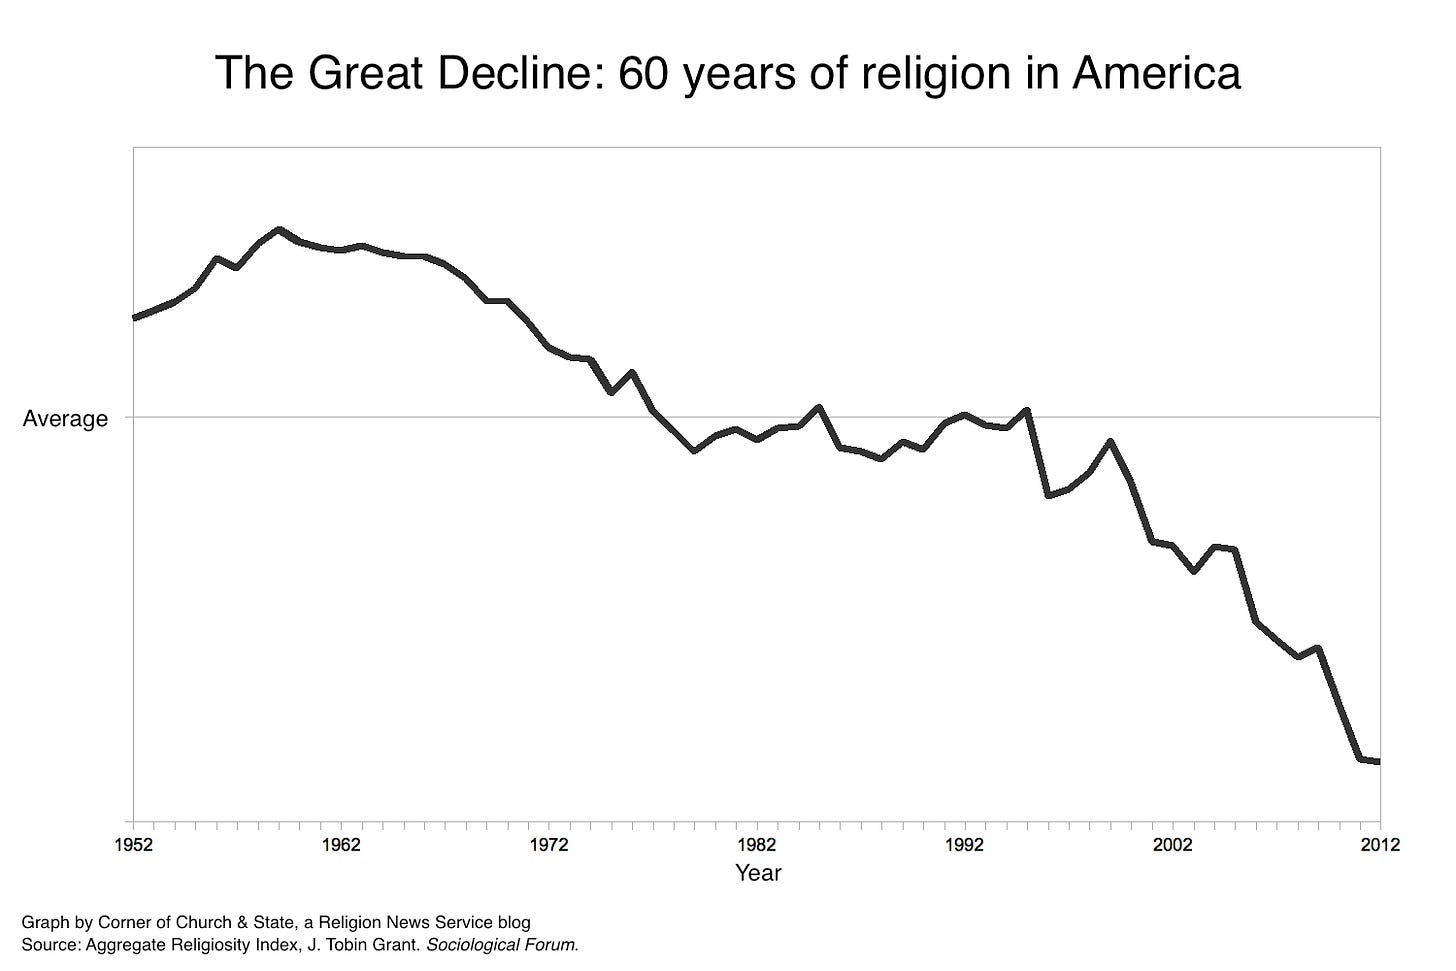 The Great Decline: 60 years of religion in one graph